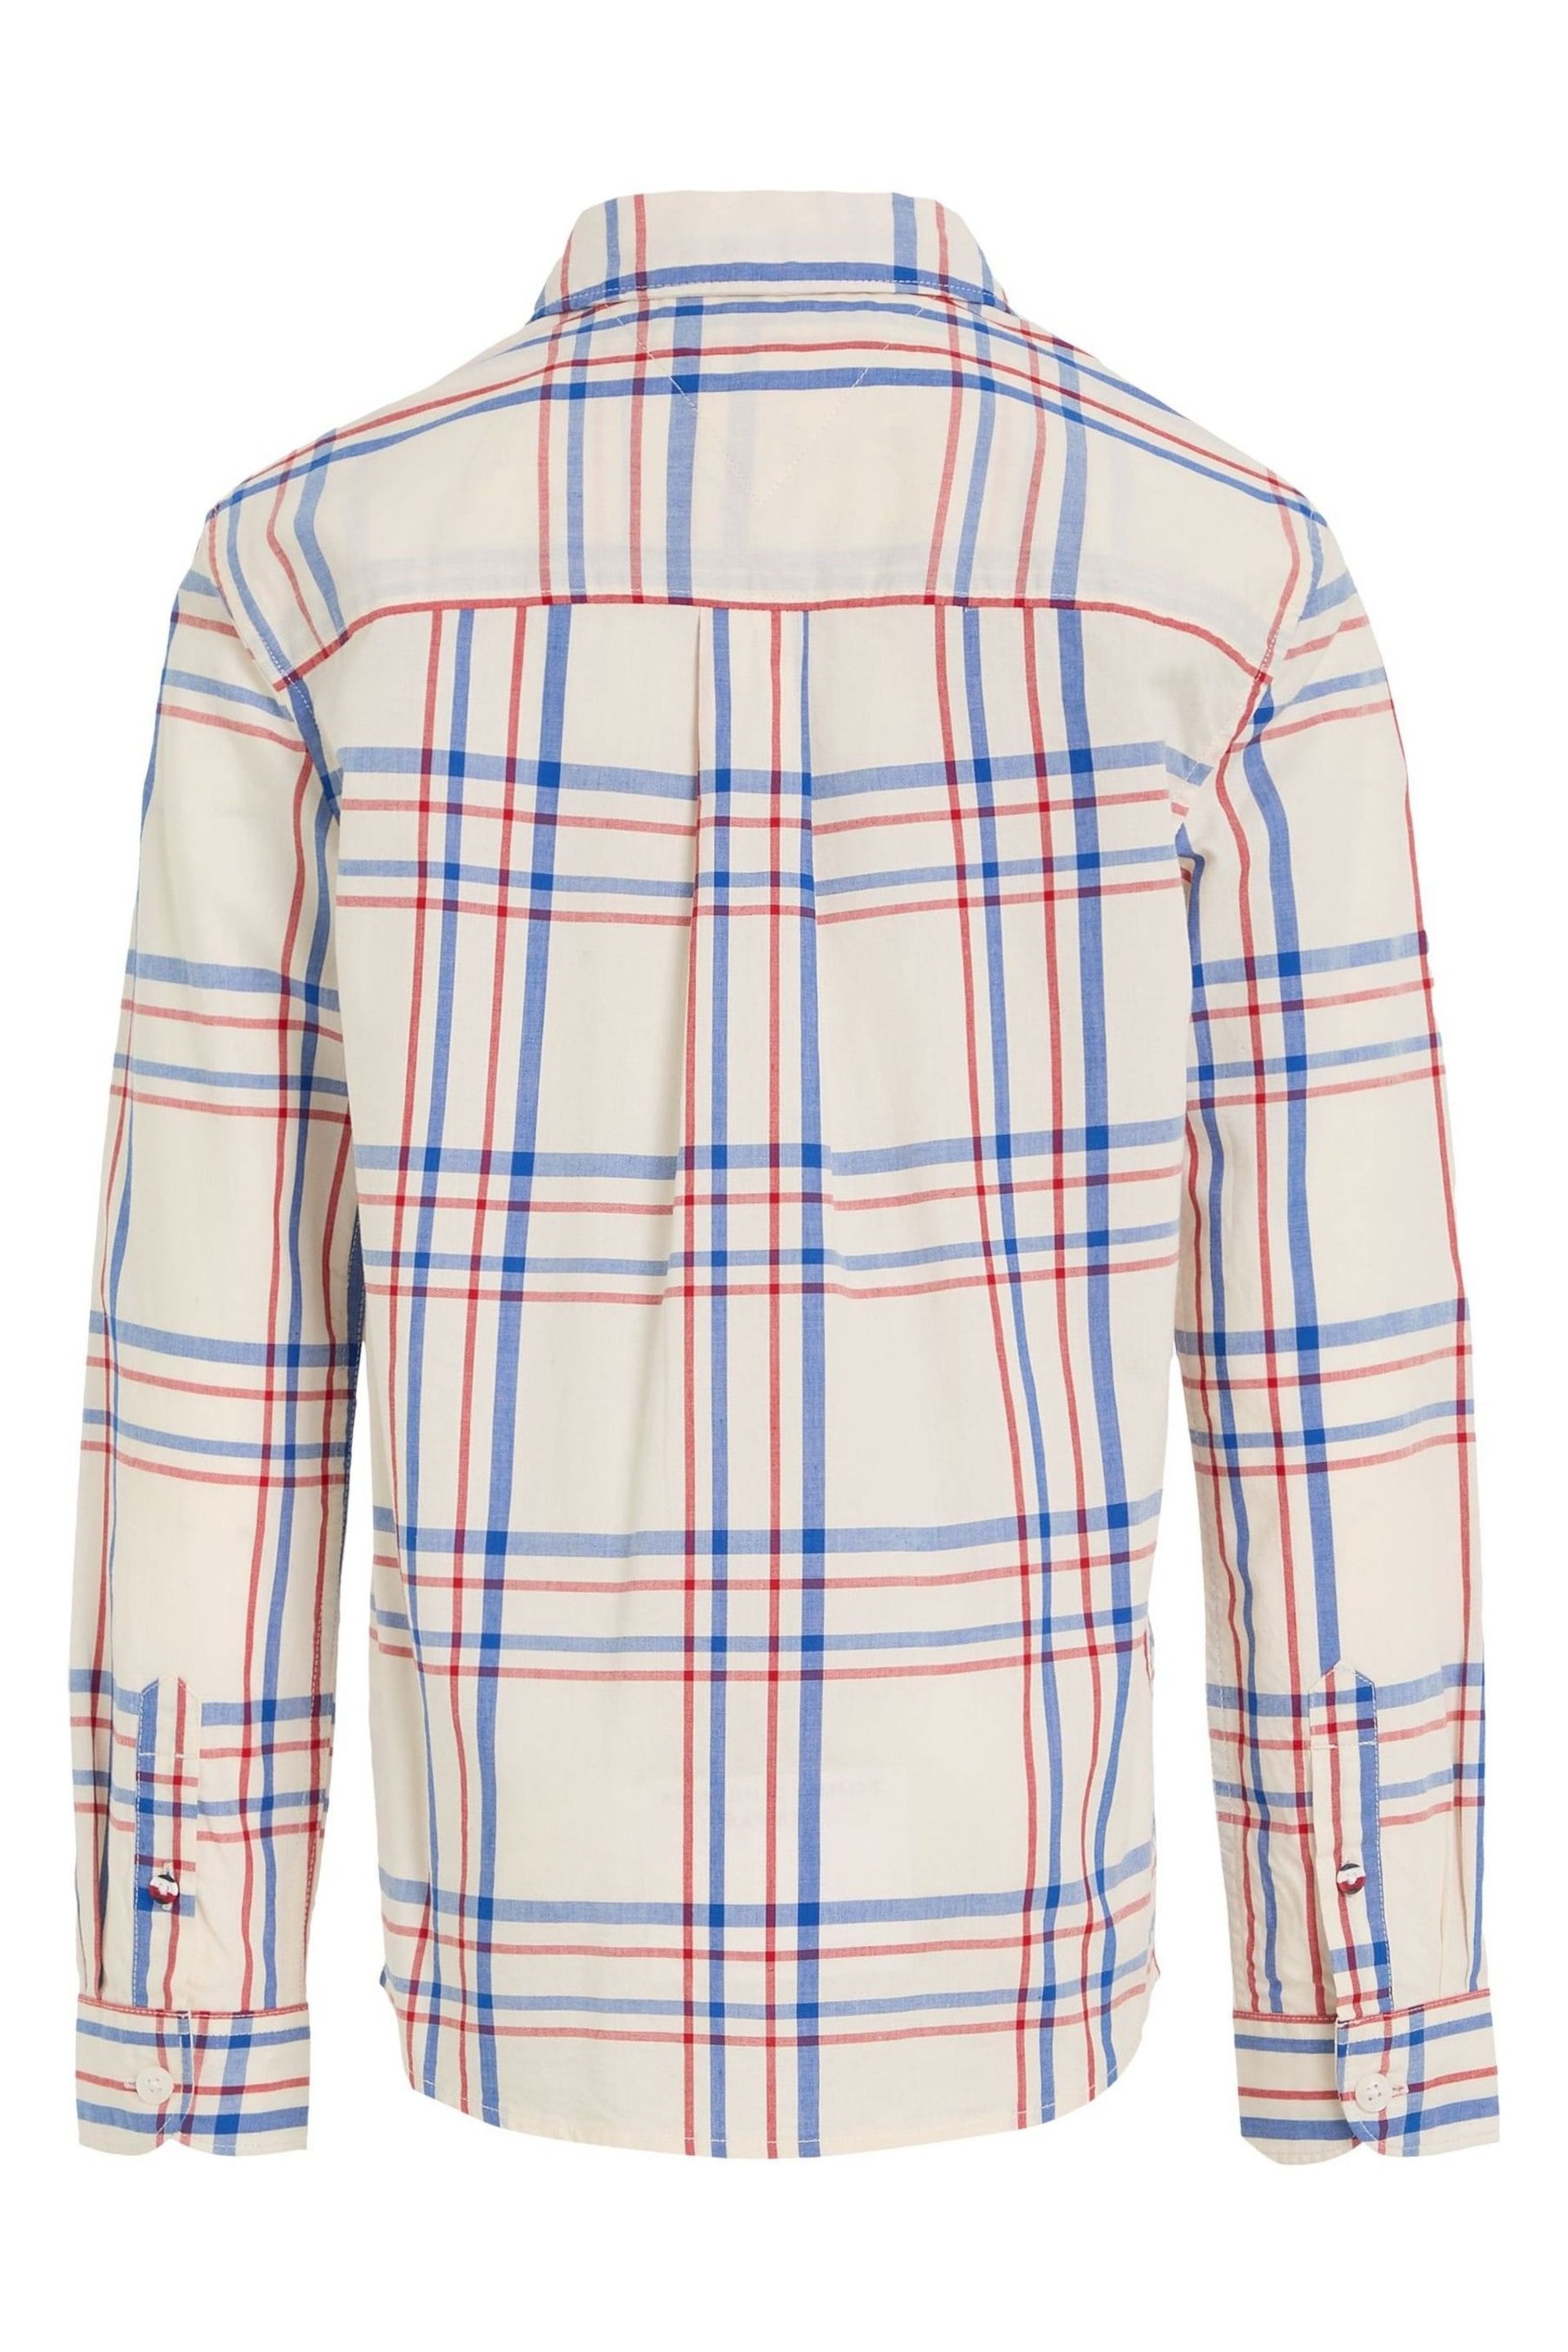 Tommy Hilfiger Long Sleeve White Check Shirt - Image 5 of 6